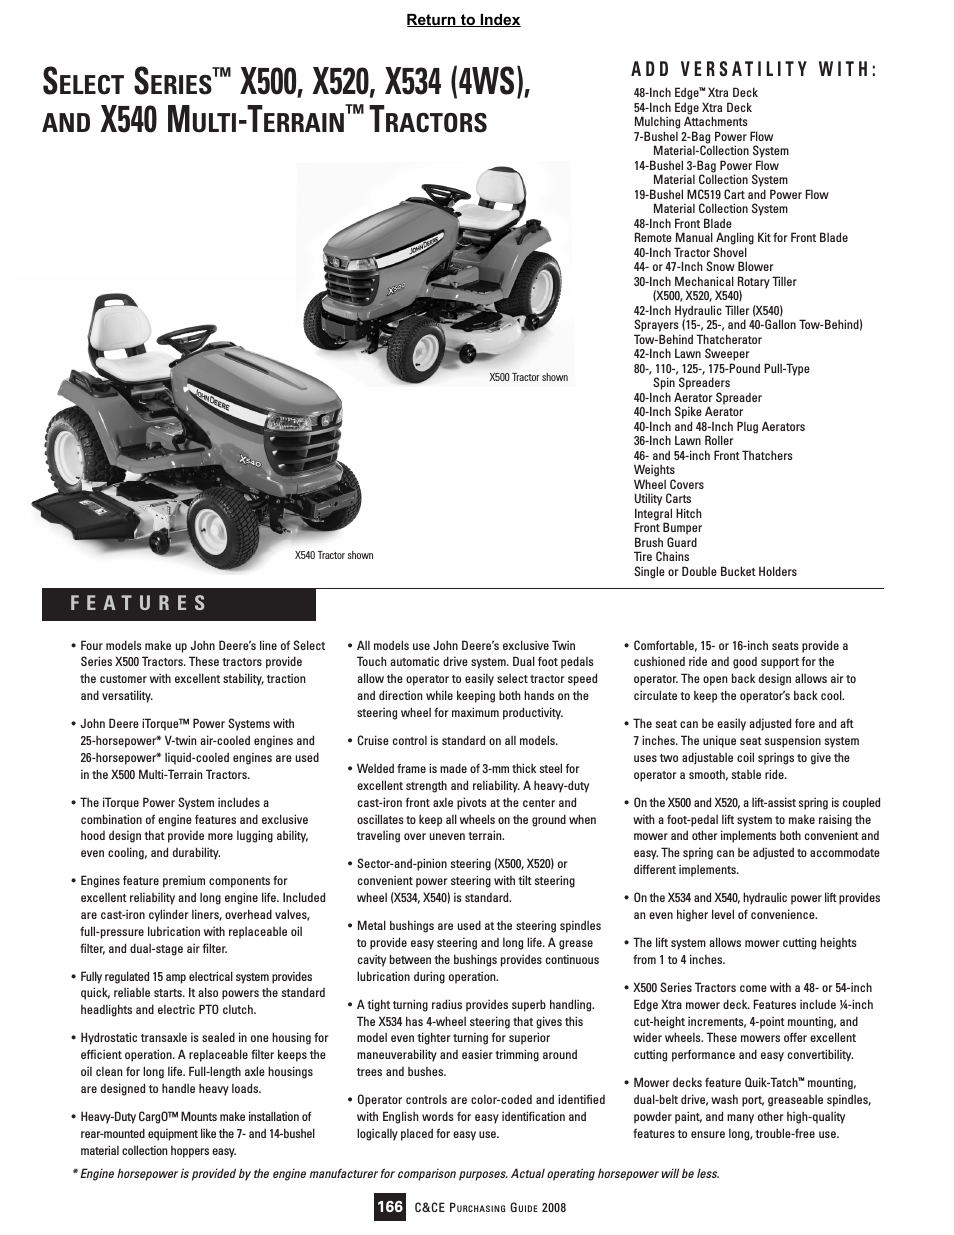 Select Series X534 (Page 1)